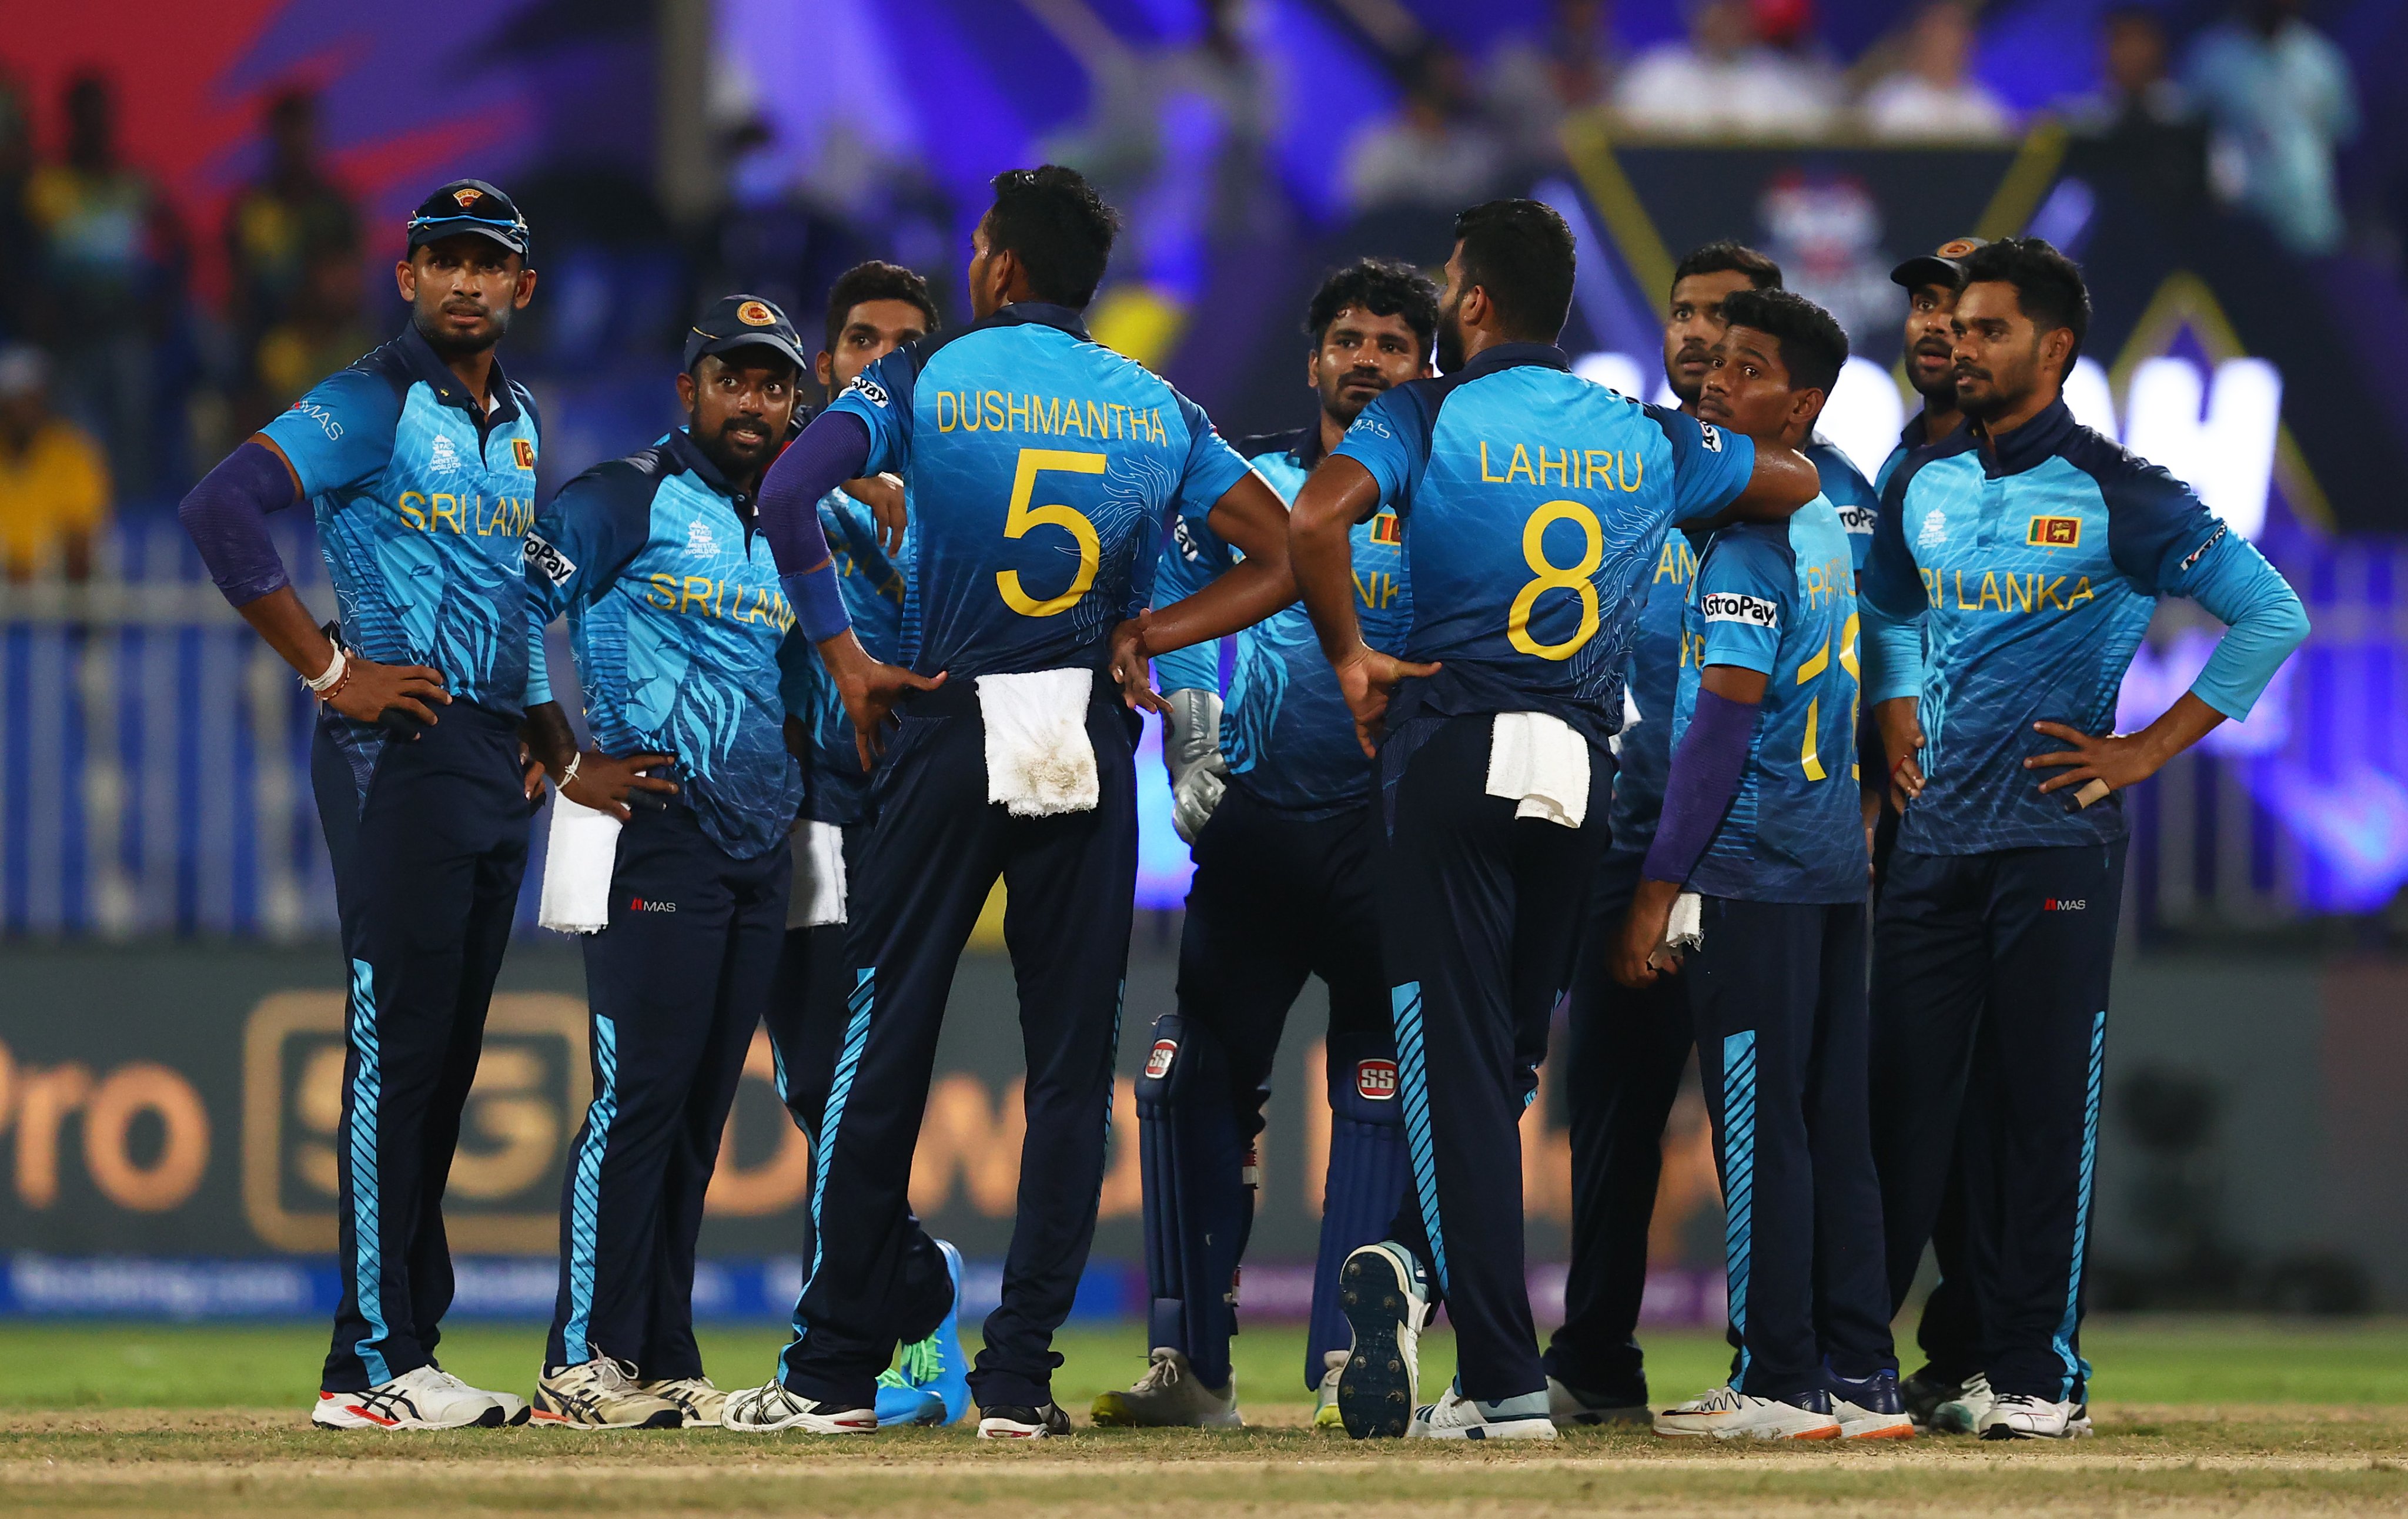 T20 World Cup 2021 | Our bowlers executed really well, says Dasun Shanaka as Sri Lanka top Group A Round 1 table